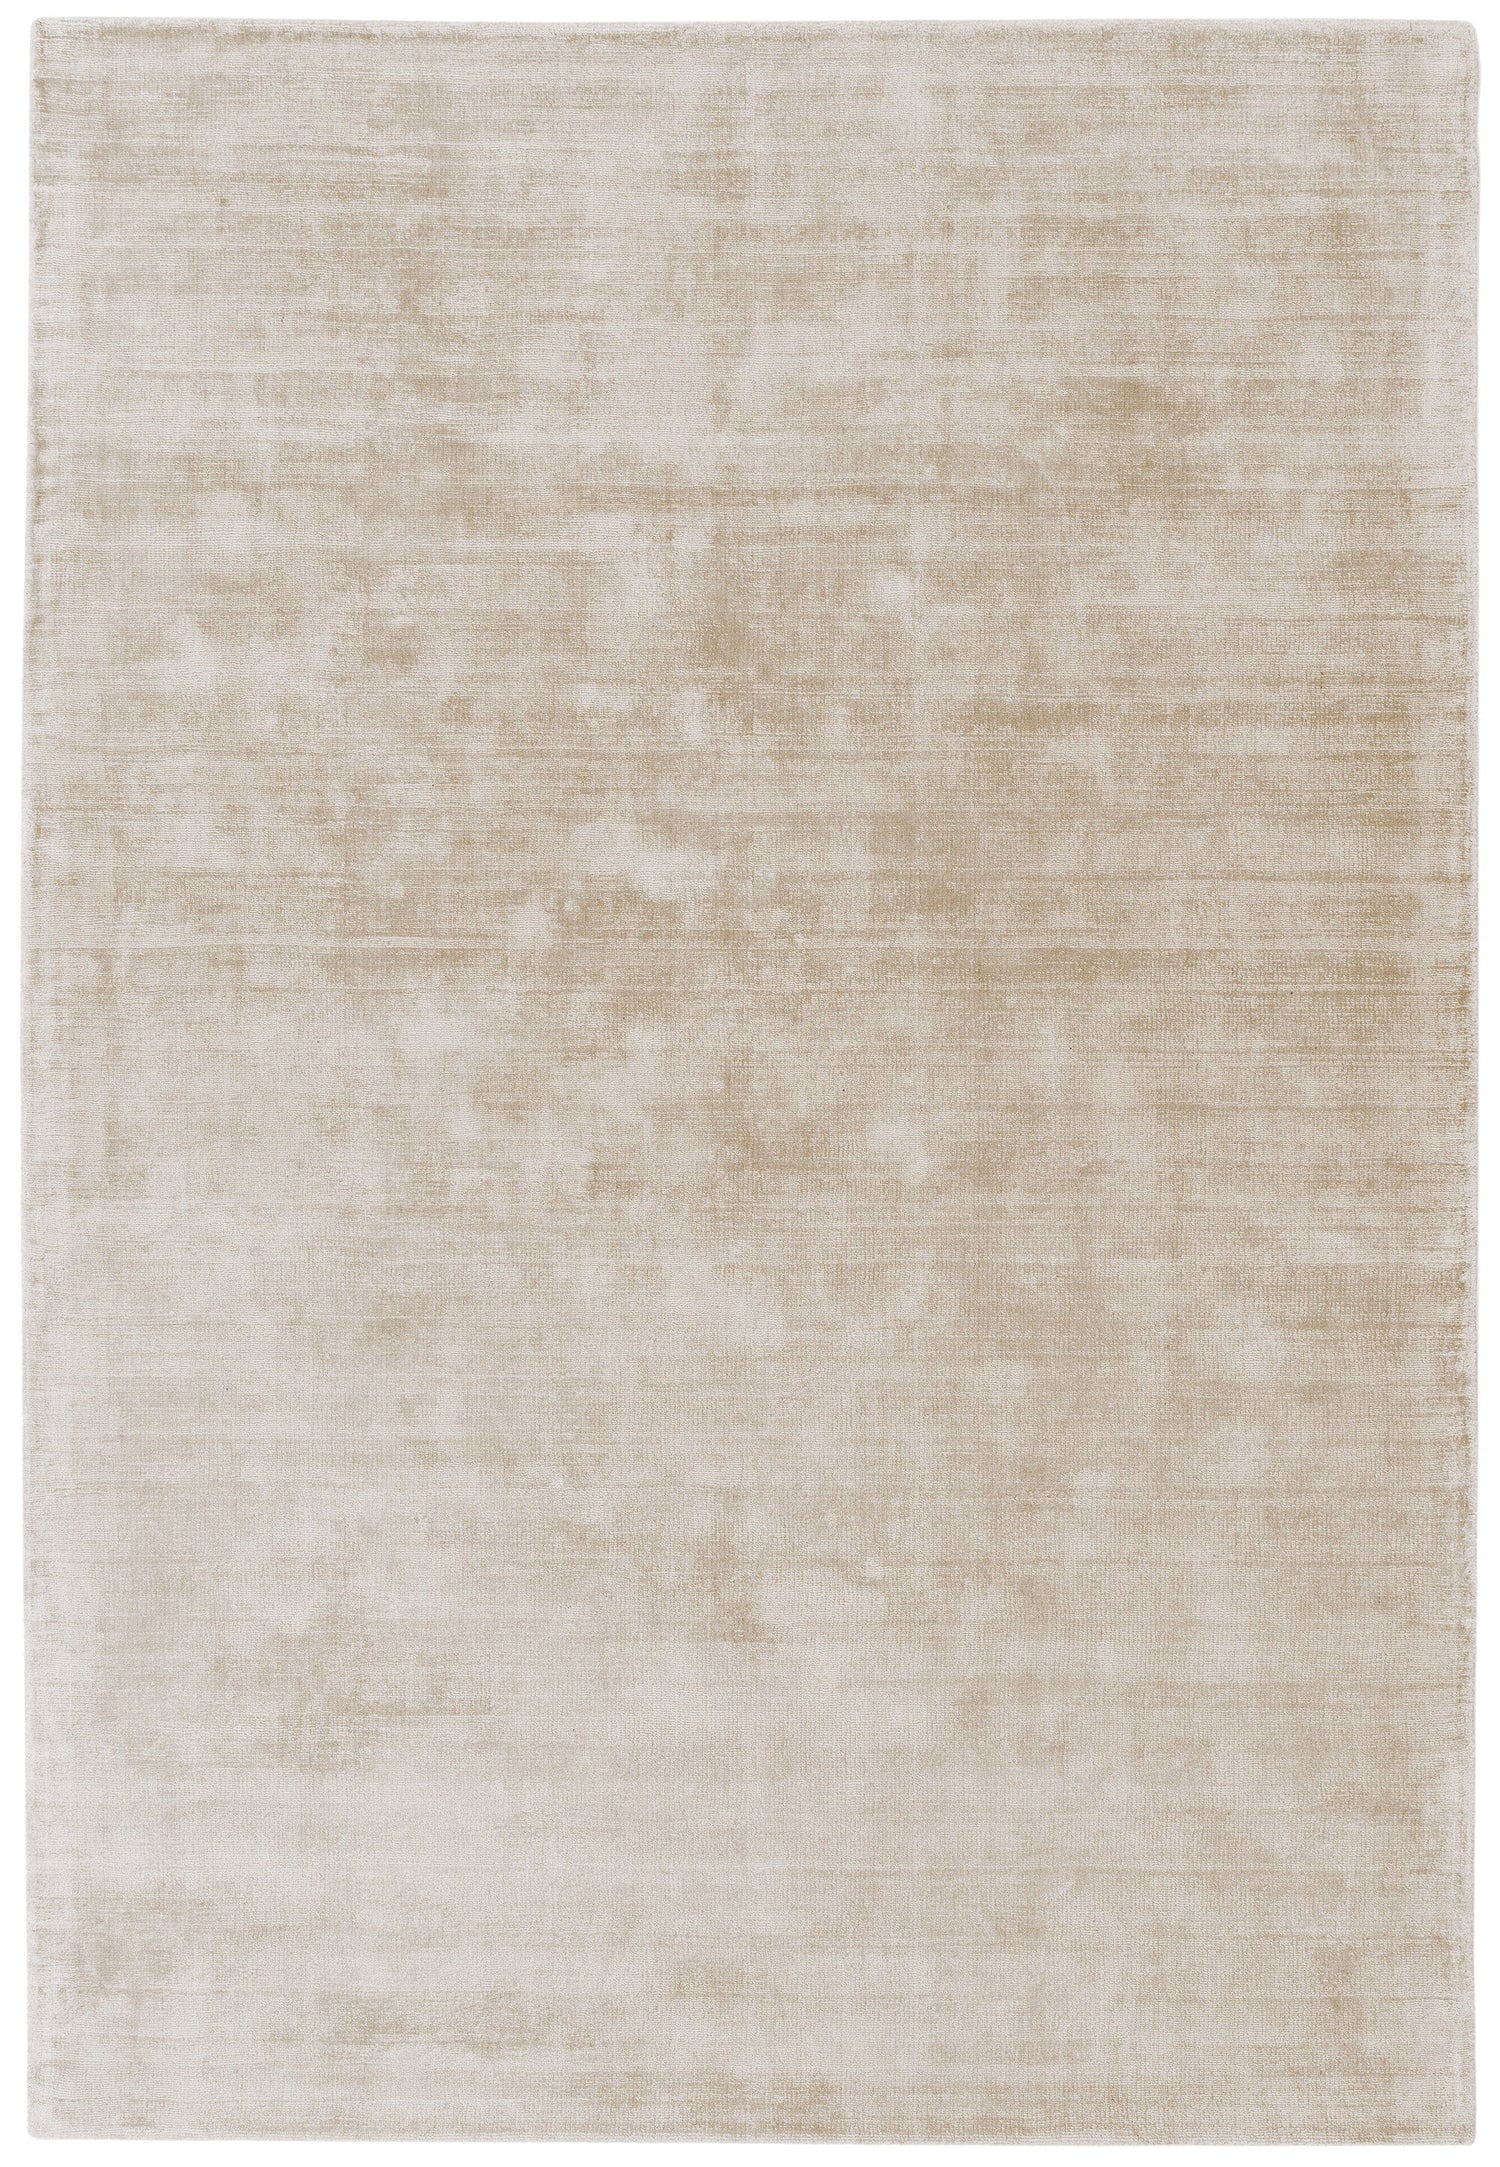  Asiatic Carpets-Asiatic Carpets Blade Hand Woven Rug Putty - 160 x 230cm-Beige, Natural 485 